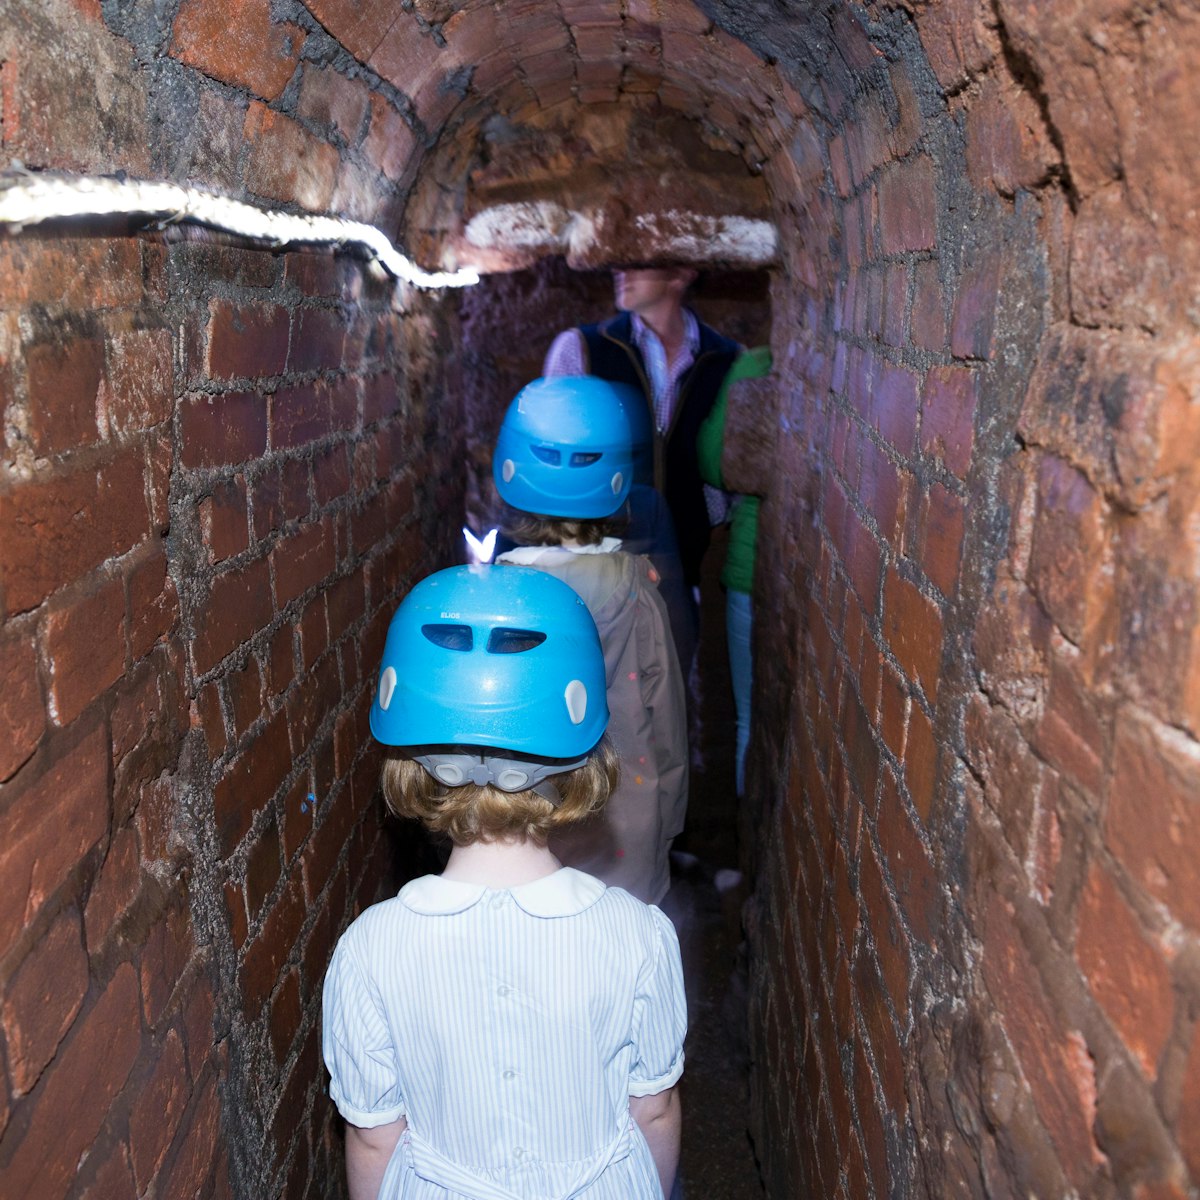 TYFKFC Family including children / kid / kids and young girl follow a group trip around Exeter's underground passages and tunnels, interesting destination for family tour of these ancient cut and cover tunnel network. UK (109)